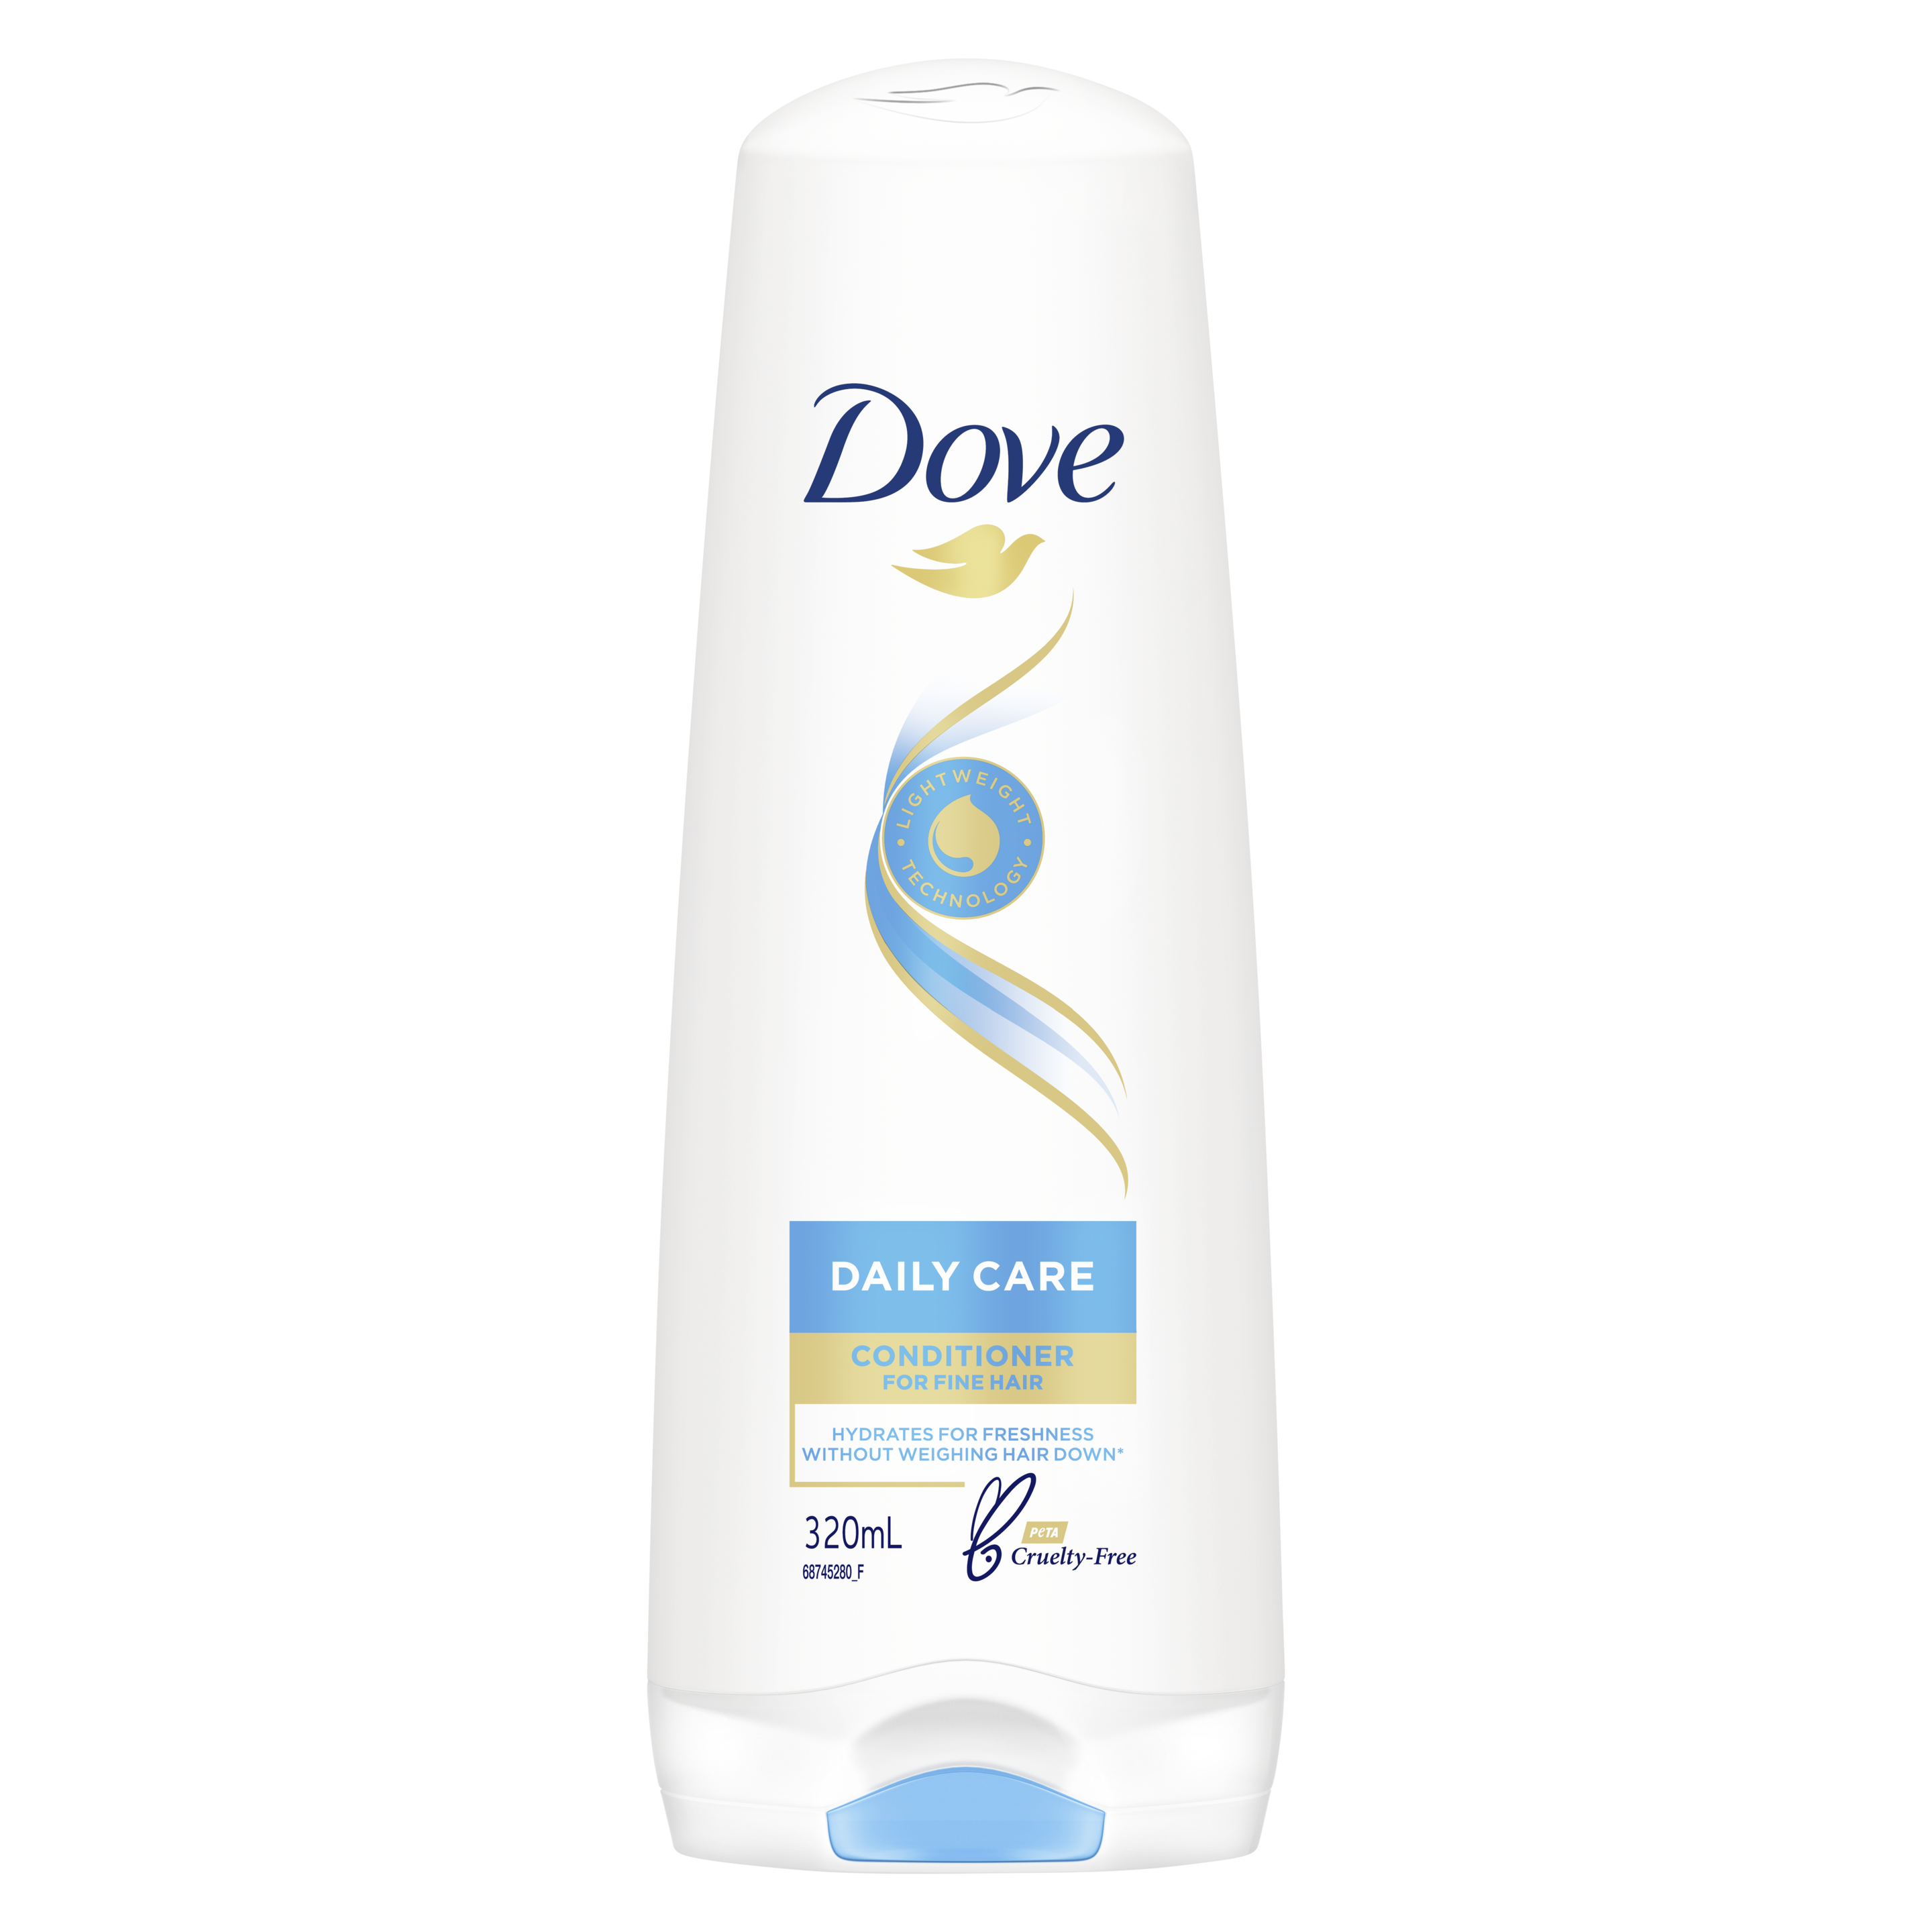 Daily Care Conditioner Text